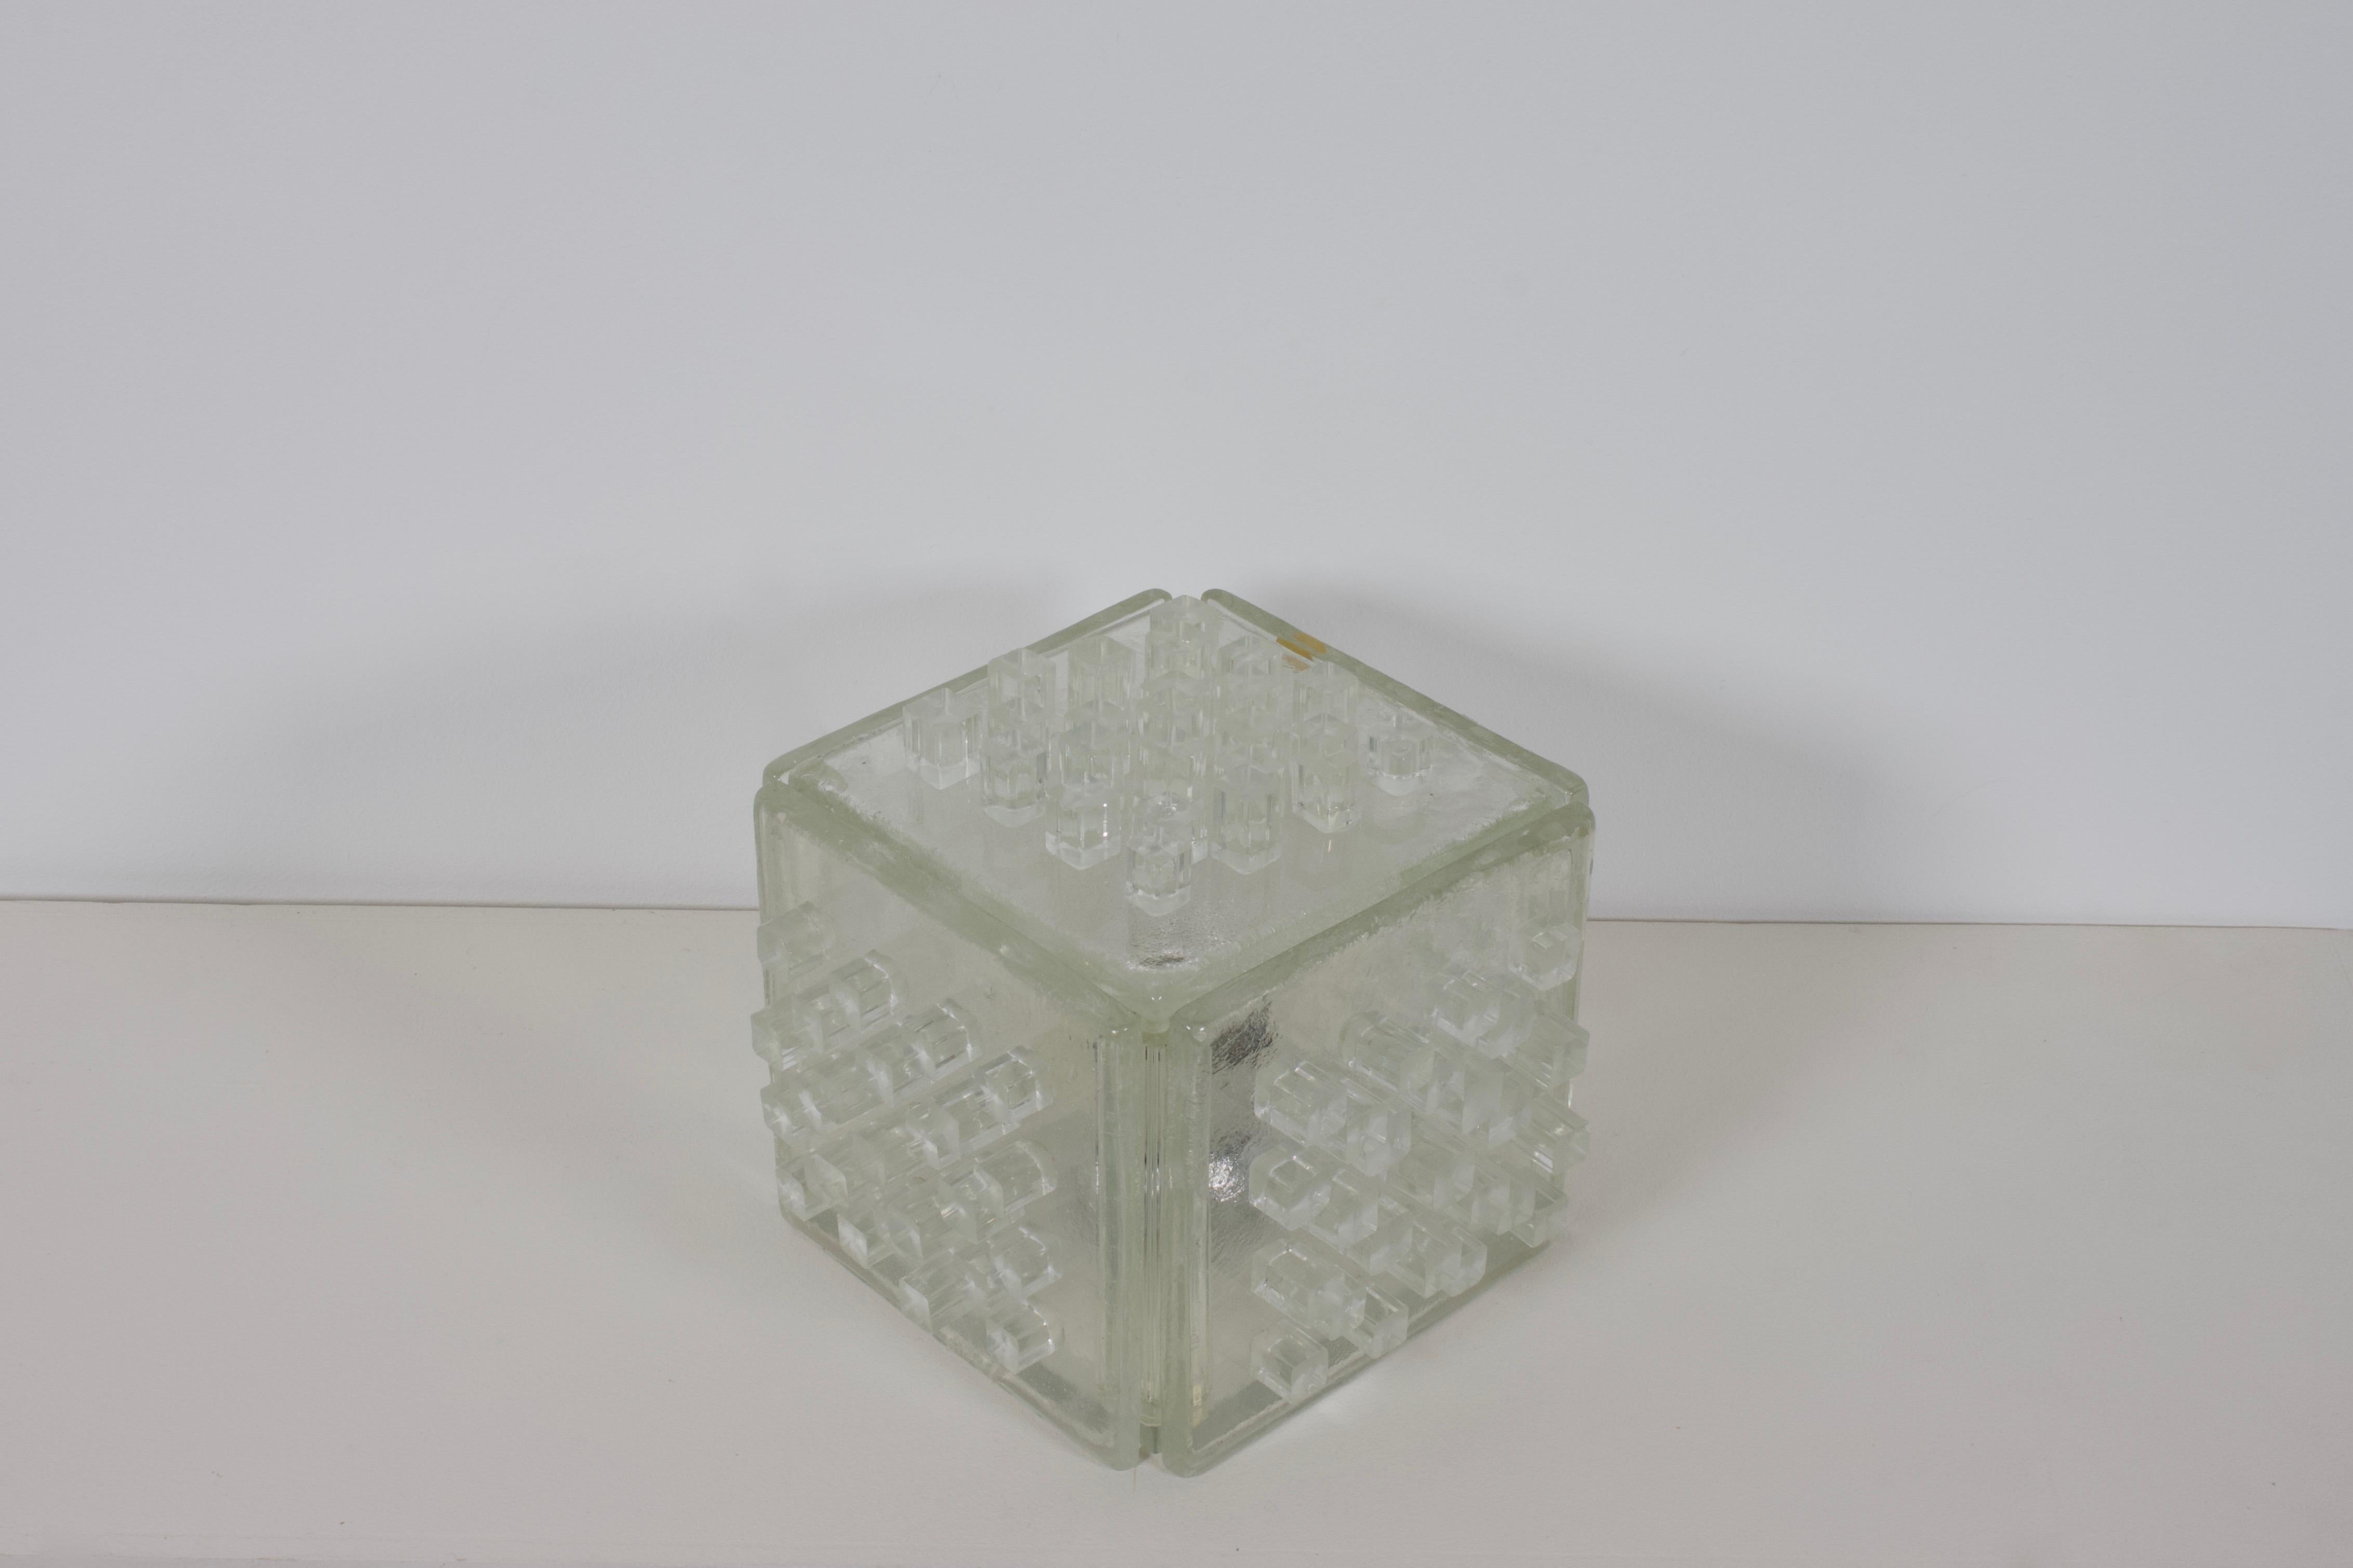 Original Poliarte ‘Apis’ lamp in very good condition.

This lamp is made of thick slabs of raw crystal with a graphic pattern of glass cubes on each side.

The raw glass creates a great light effect when lit.

It still has the original